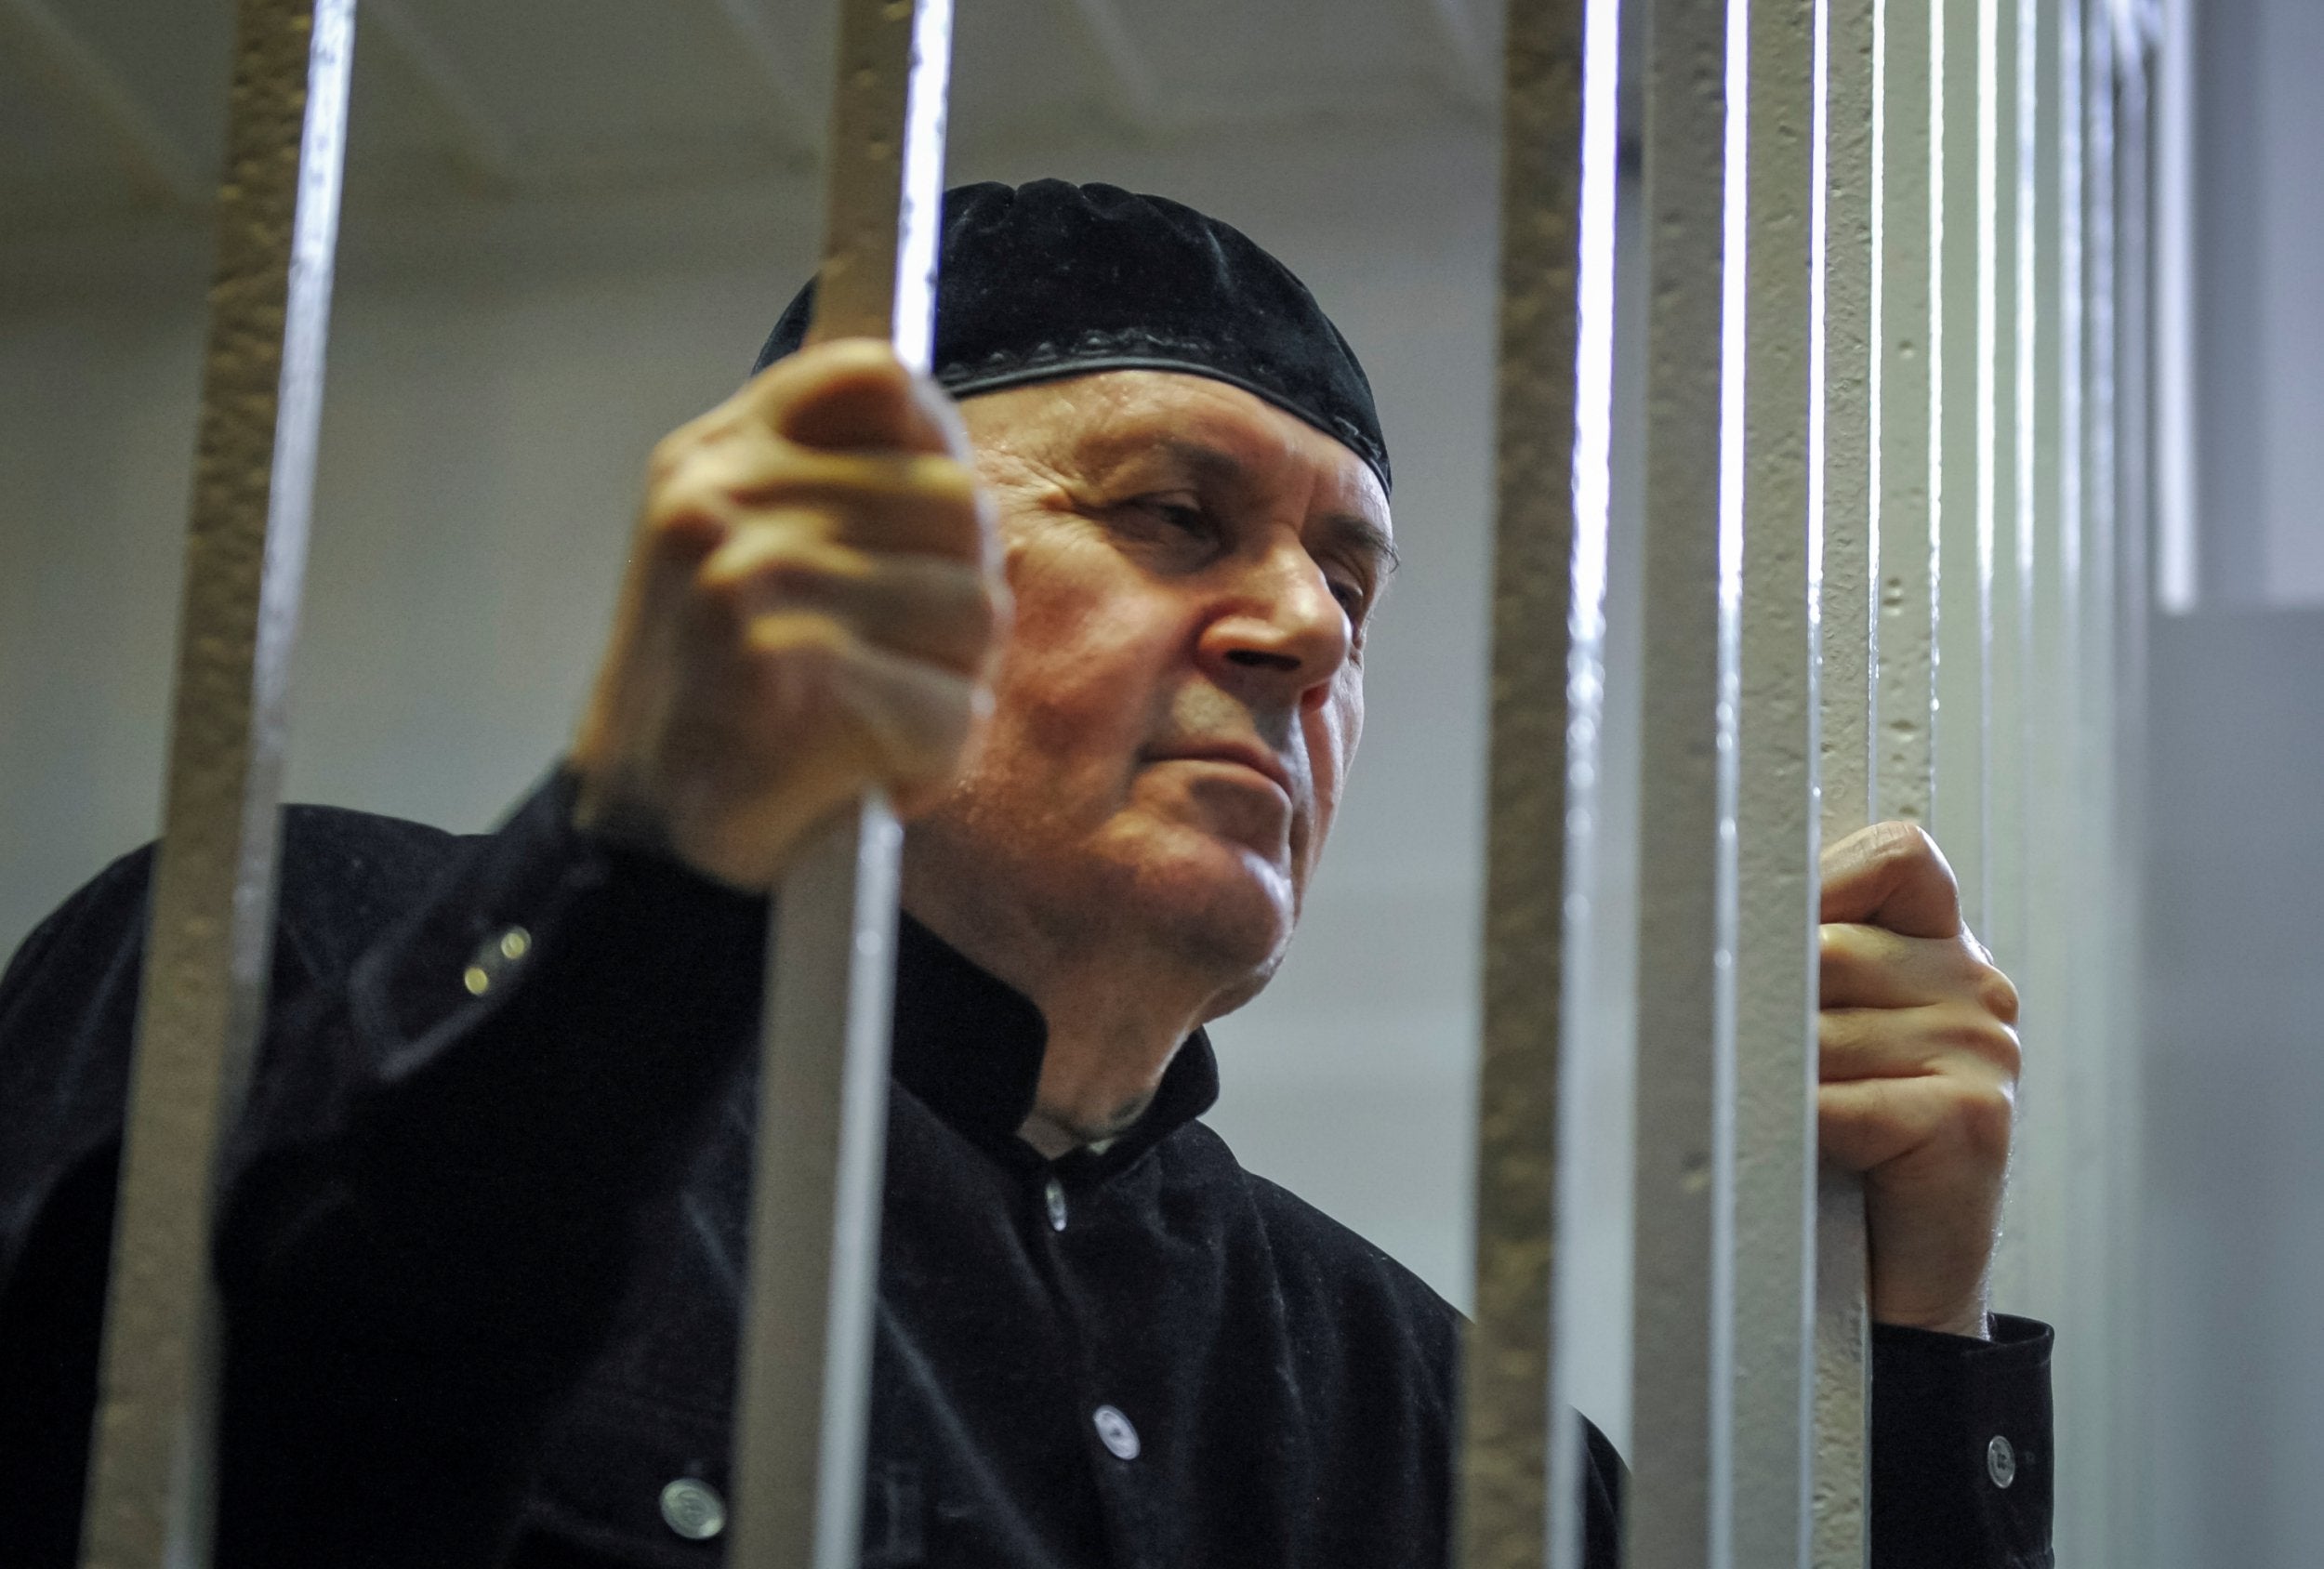 Titiyev upset Chechen authorities by documenting torture and disappearances